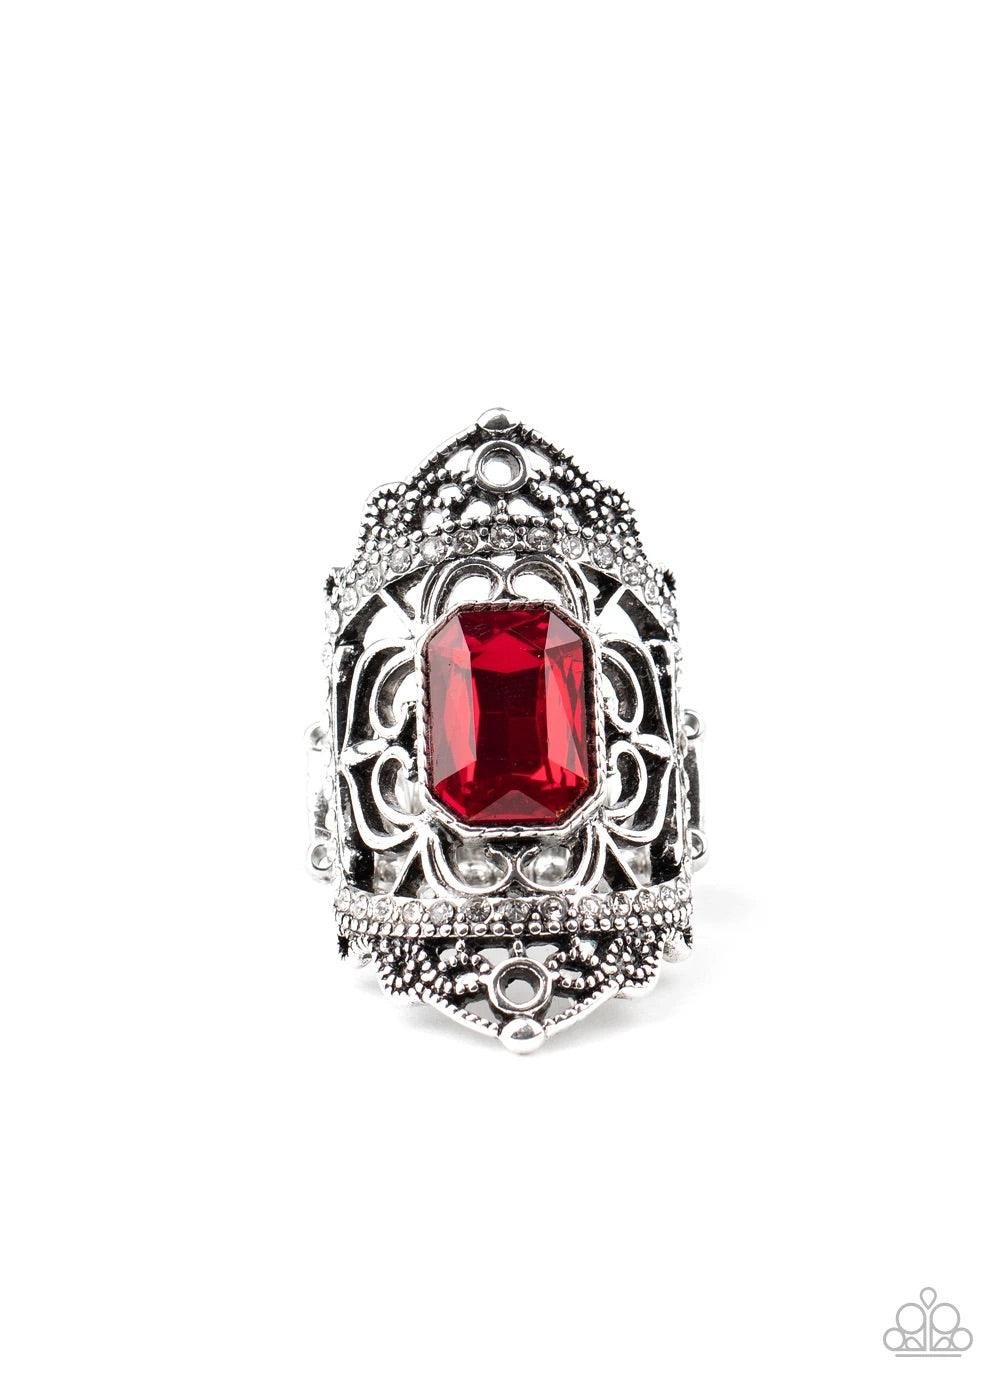 Paparazzi Accessories Undefinable Dazzle - Red Infused with two bands of glittery white rhinestones, smooth and studded silver filigree branches out into a regal backdrop across the finger. Featuring an emerald style cut, a stunning red rhinestone embelli